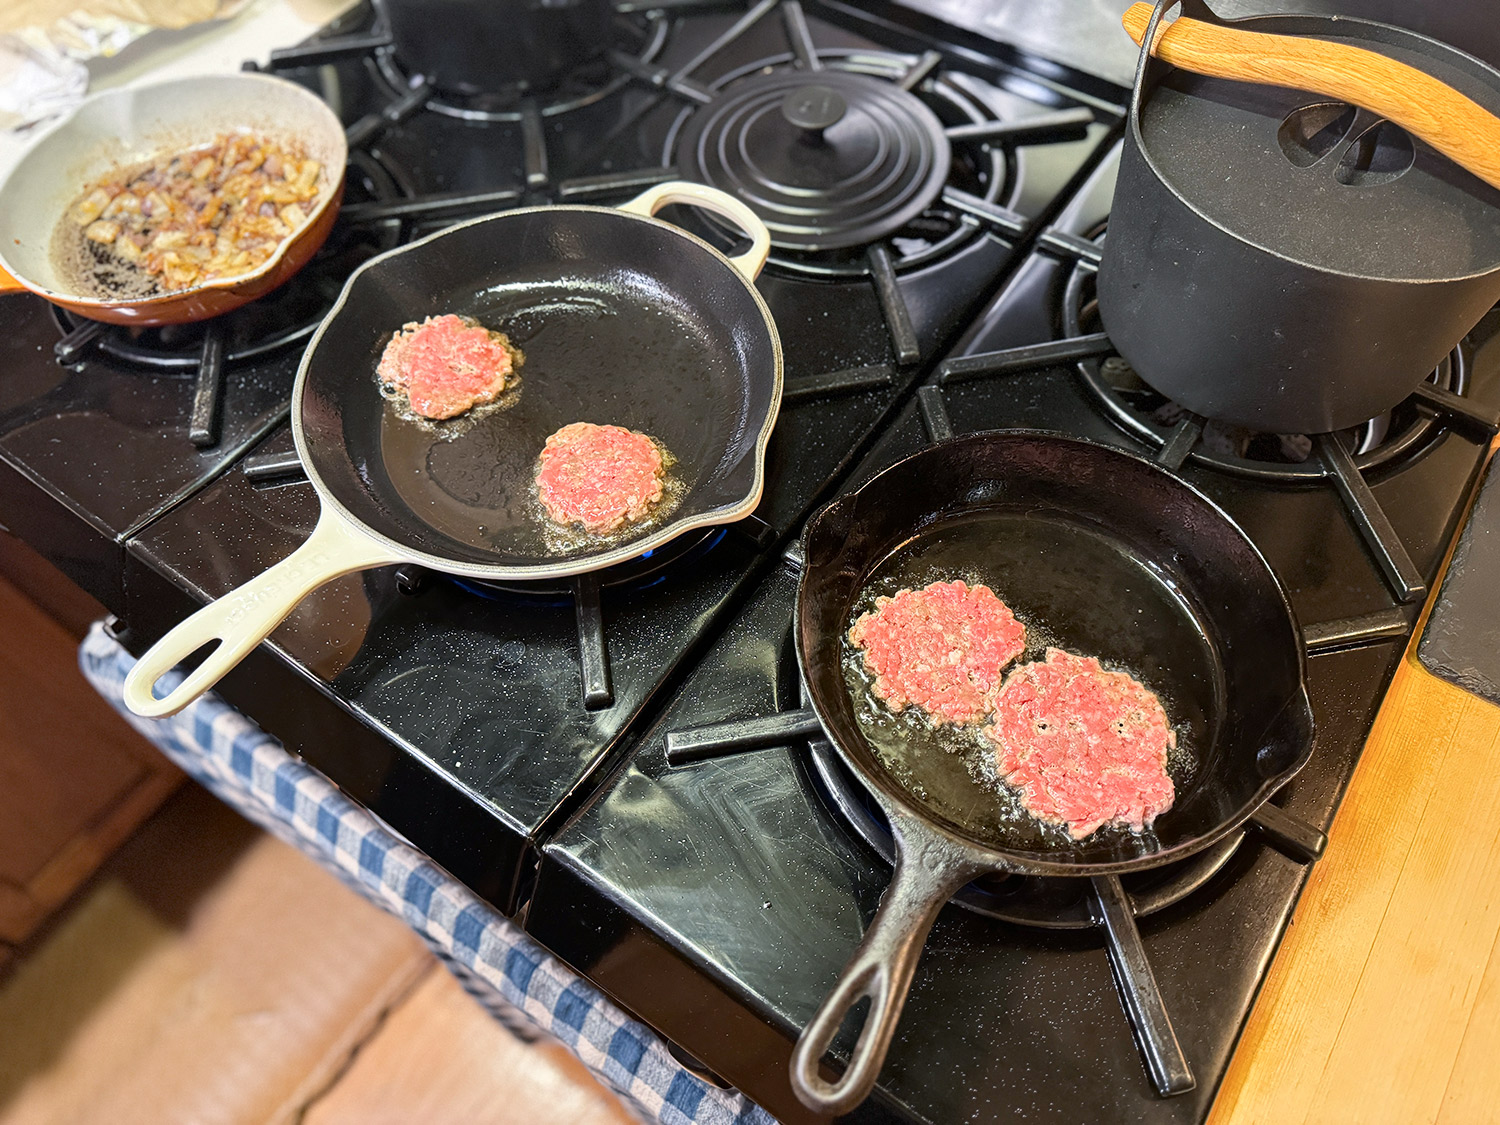 The Burger Smasher, Cast Iron Burger Press - Perfect Thin Patty Burgers  with Smasher Tool to Cook at Home